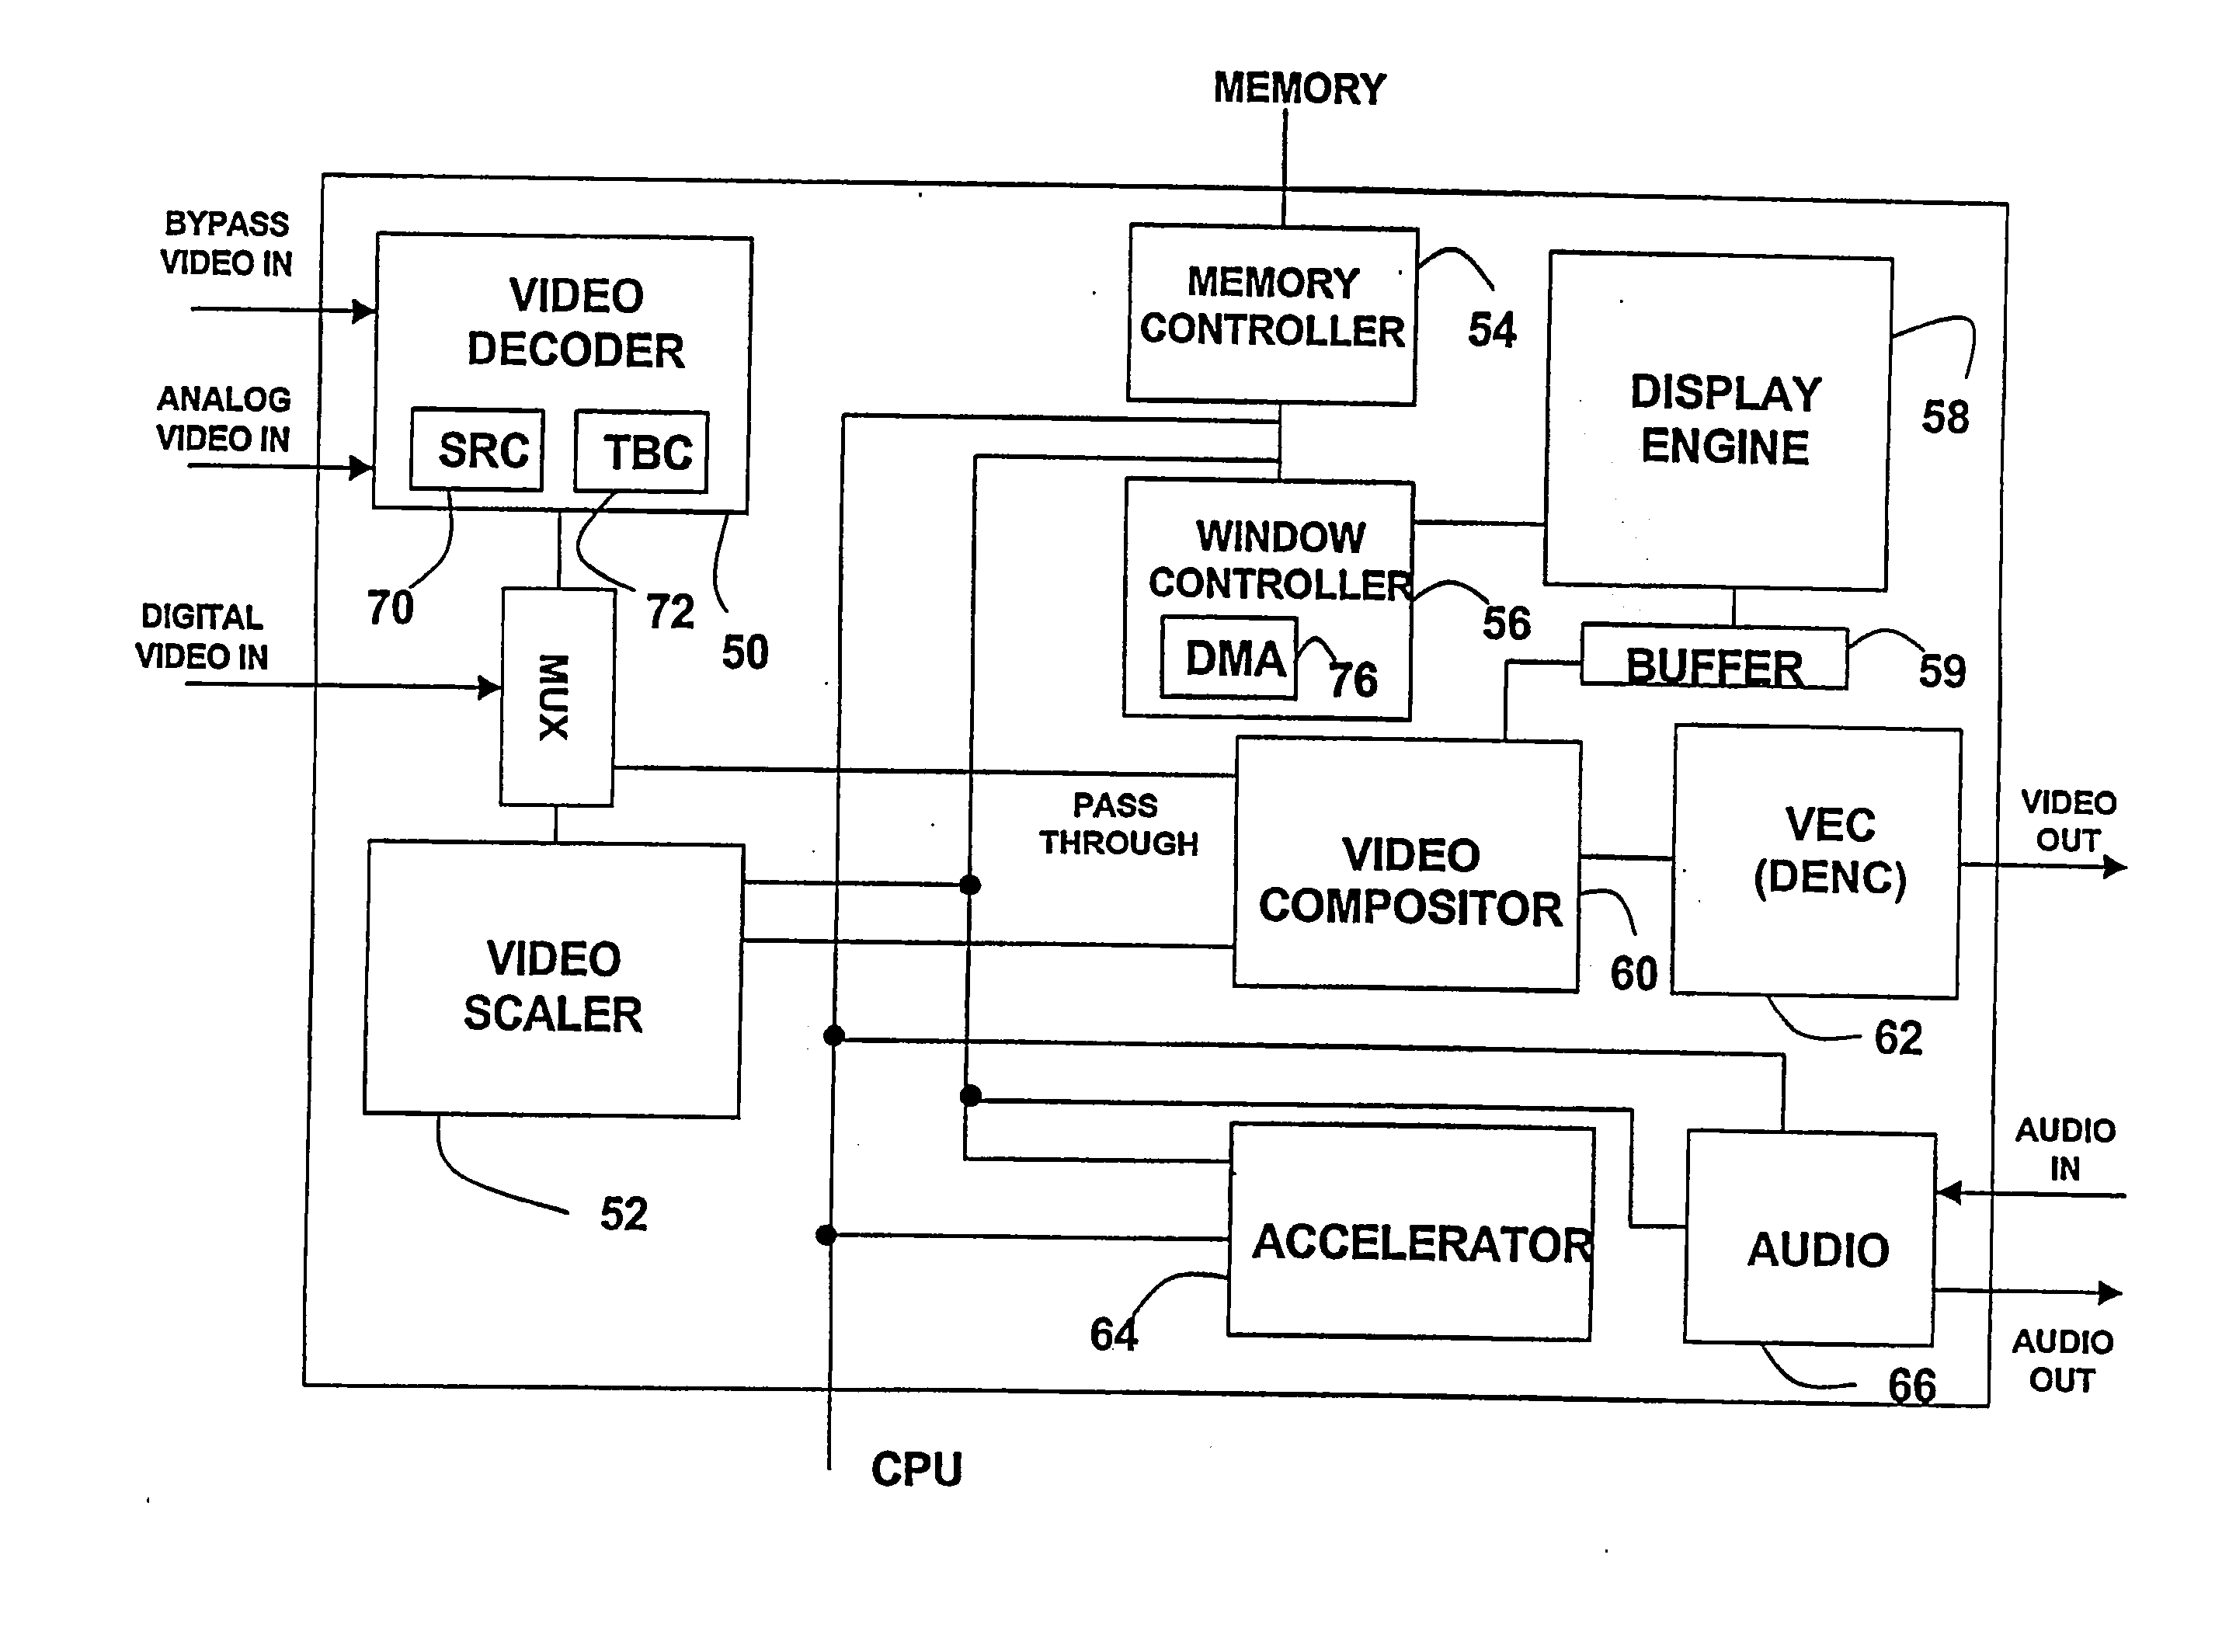 Video and graphics system with an MPEG video decoder for concurrent multi-row decoding